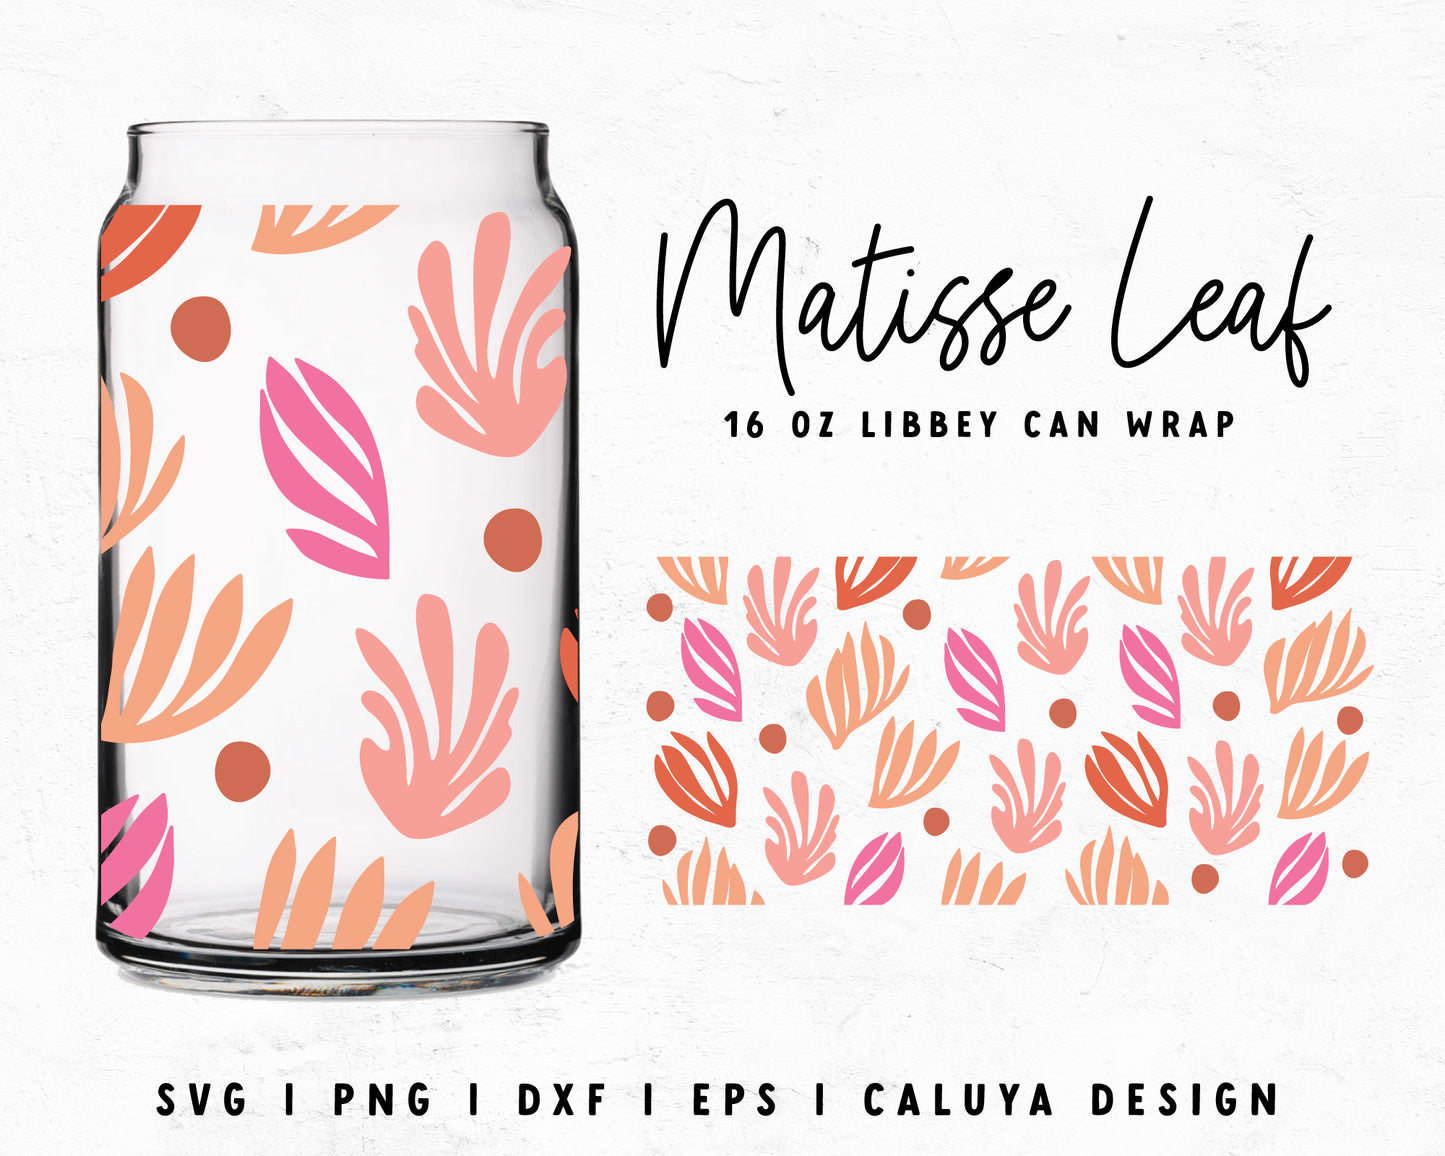 16oz Libbey Can Matisse Leaf Cup Wrap Cut File for Cricut, Cameo Silhouette | Free SVG Cut File